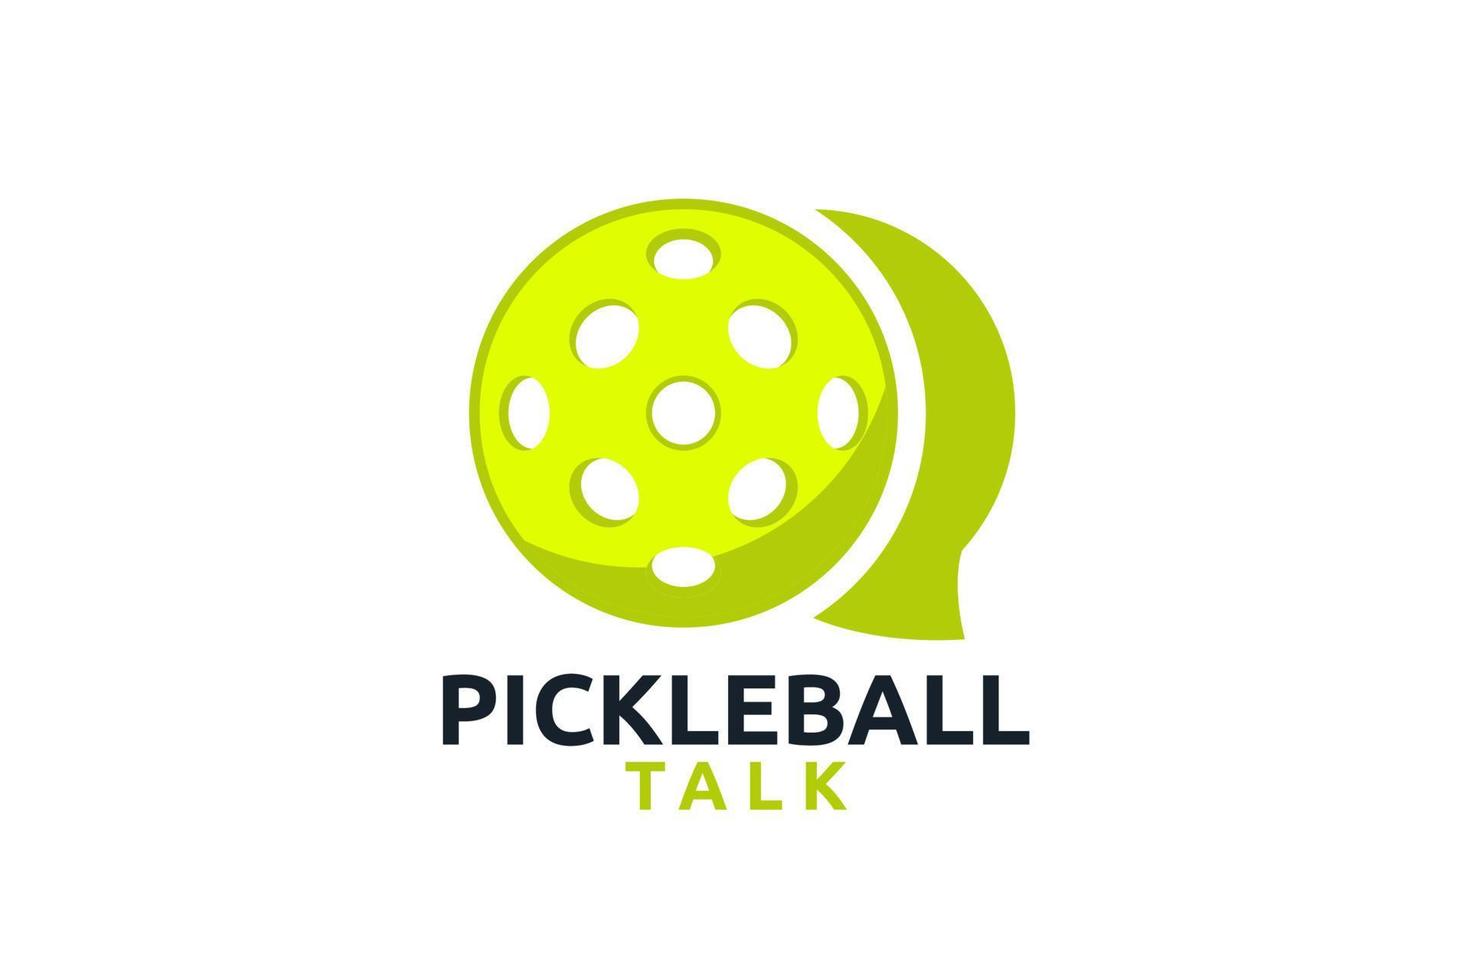 pickleball talk logo with combination of a ball and bubble or chat vector